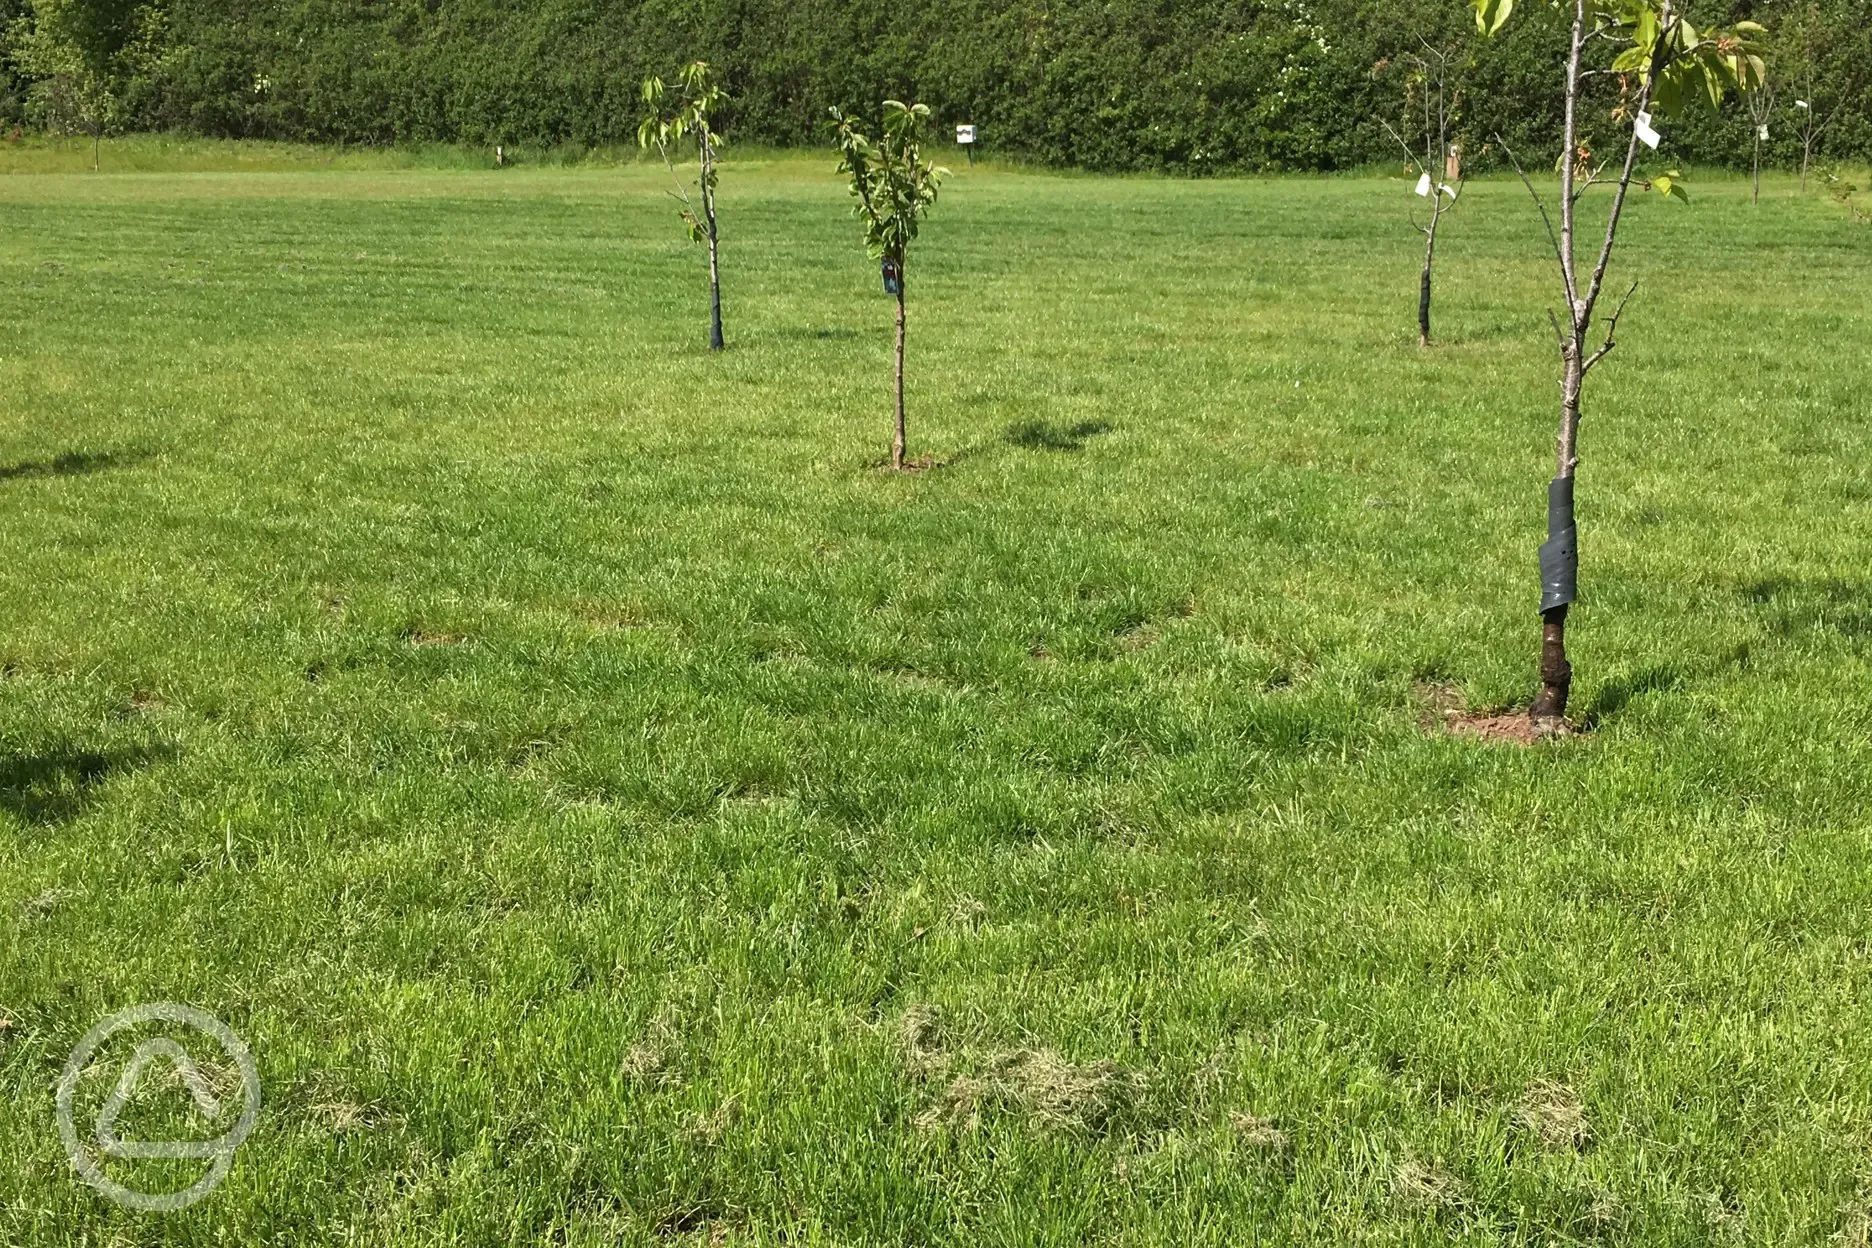 newly planted cherry trees